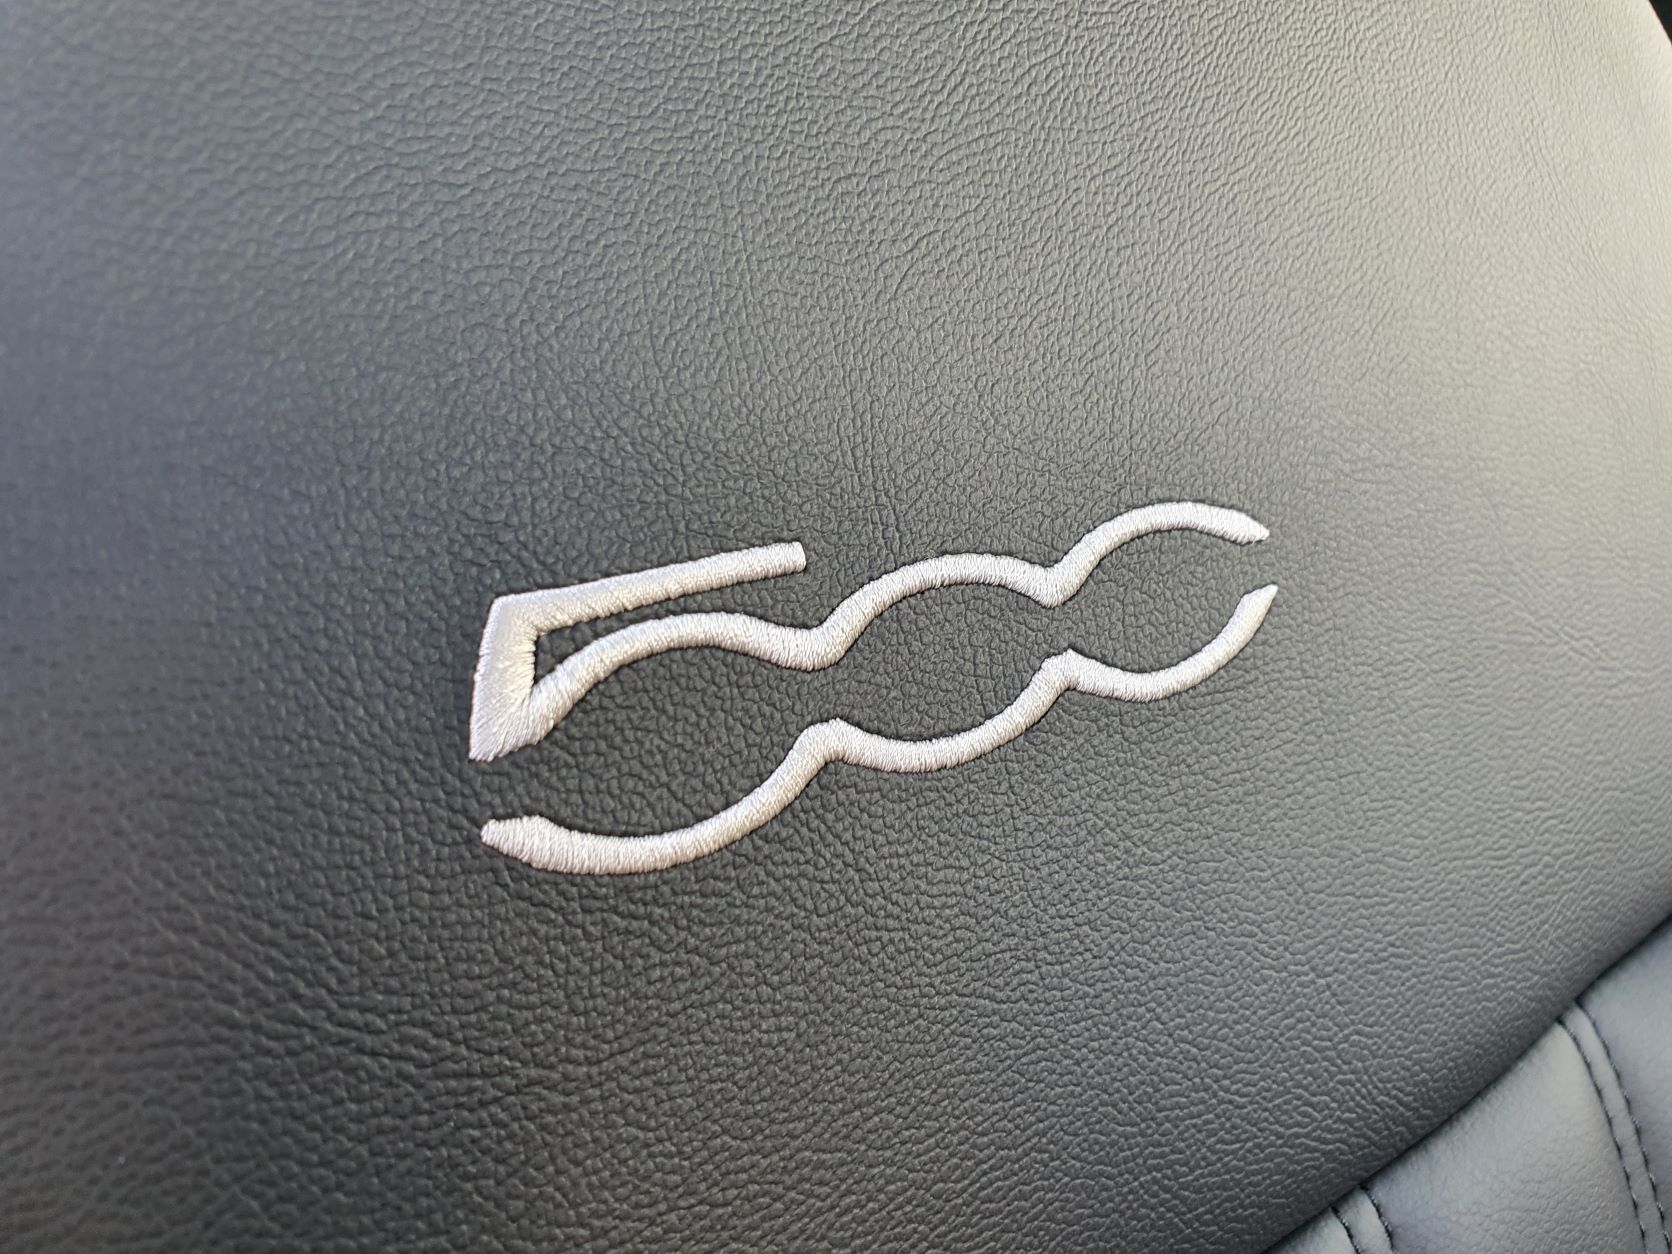 500 logo embossed into the seat on the new Fiat 500 Dolcevita